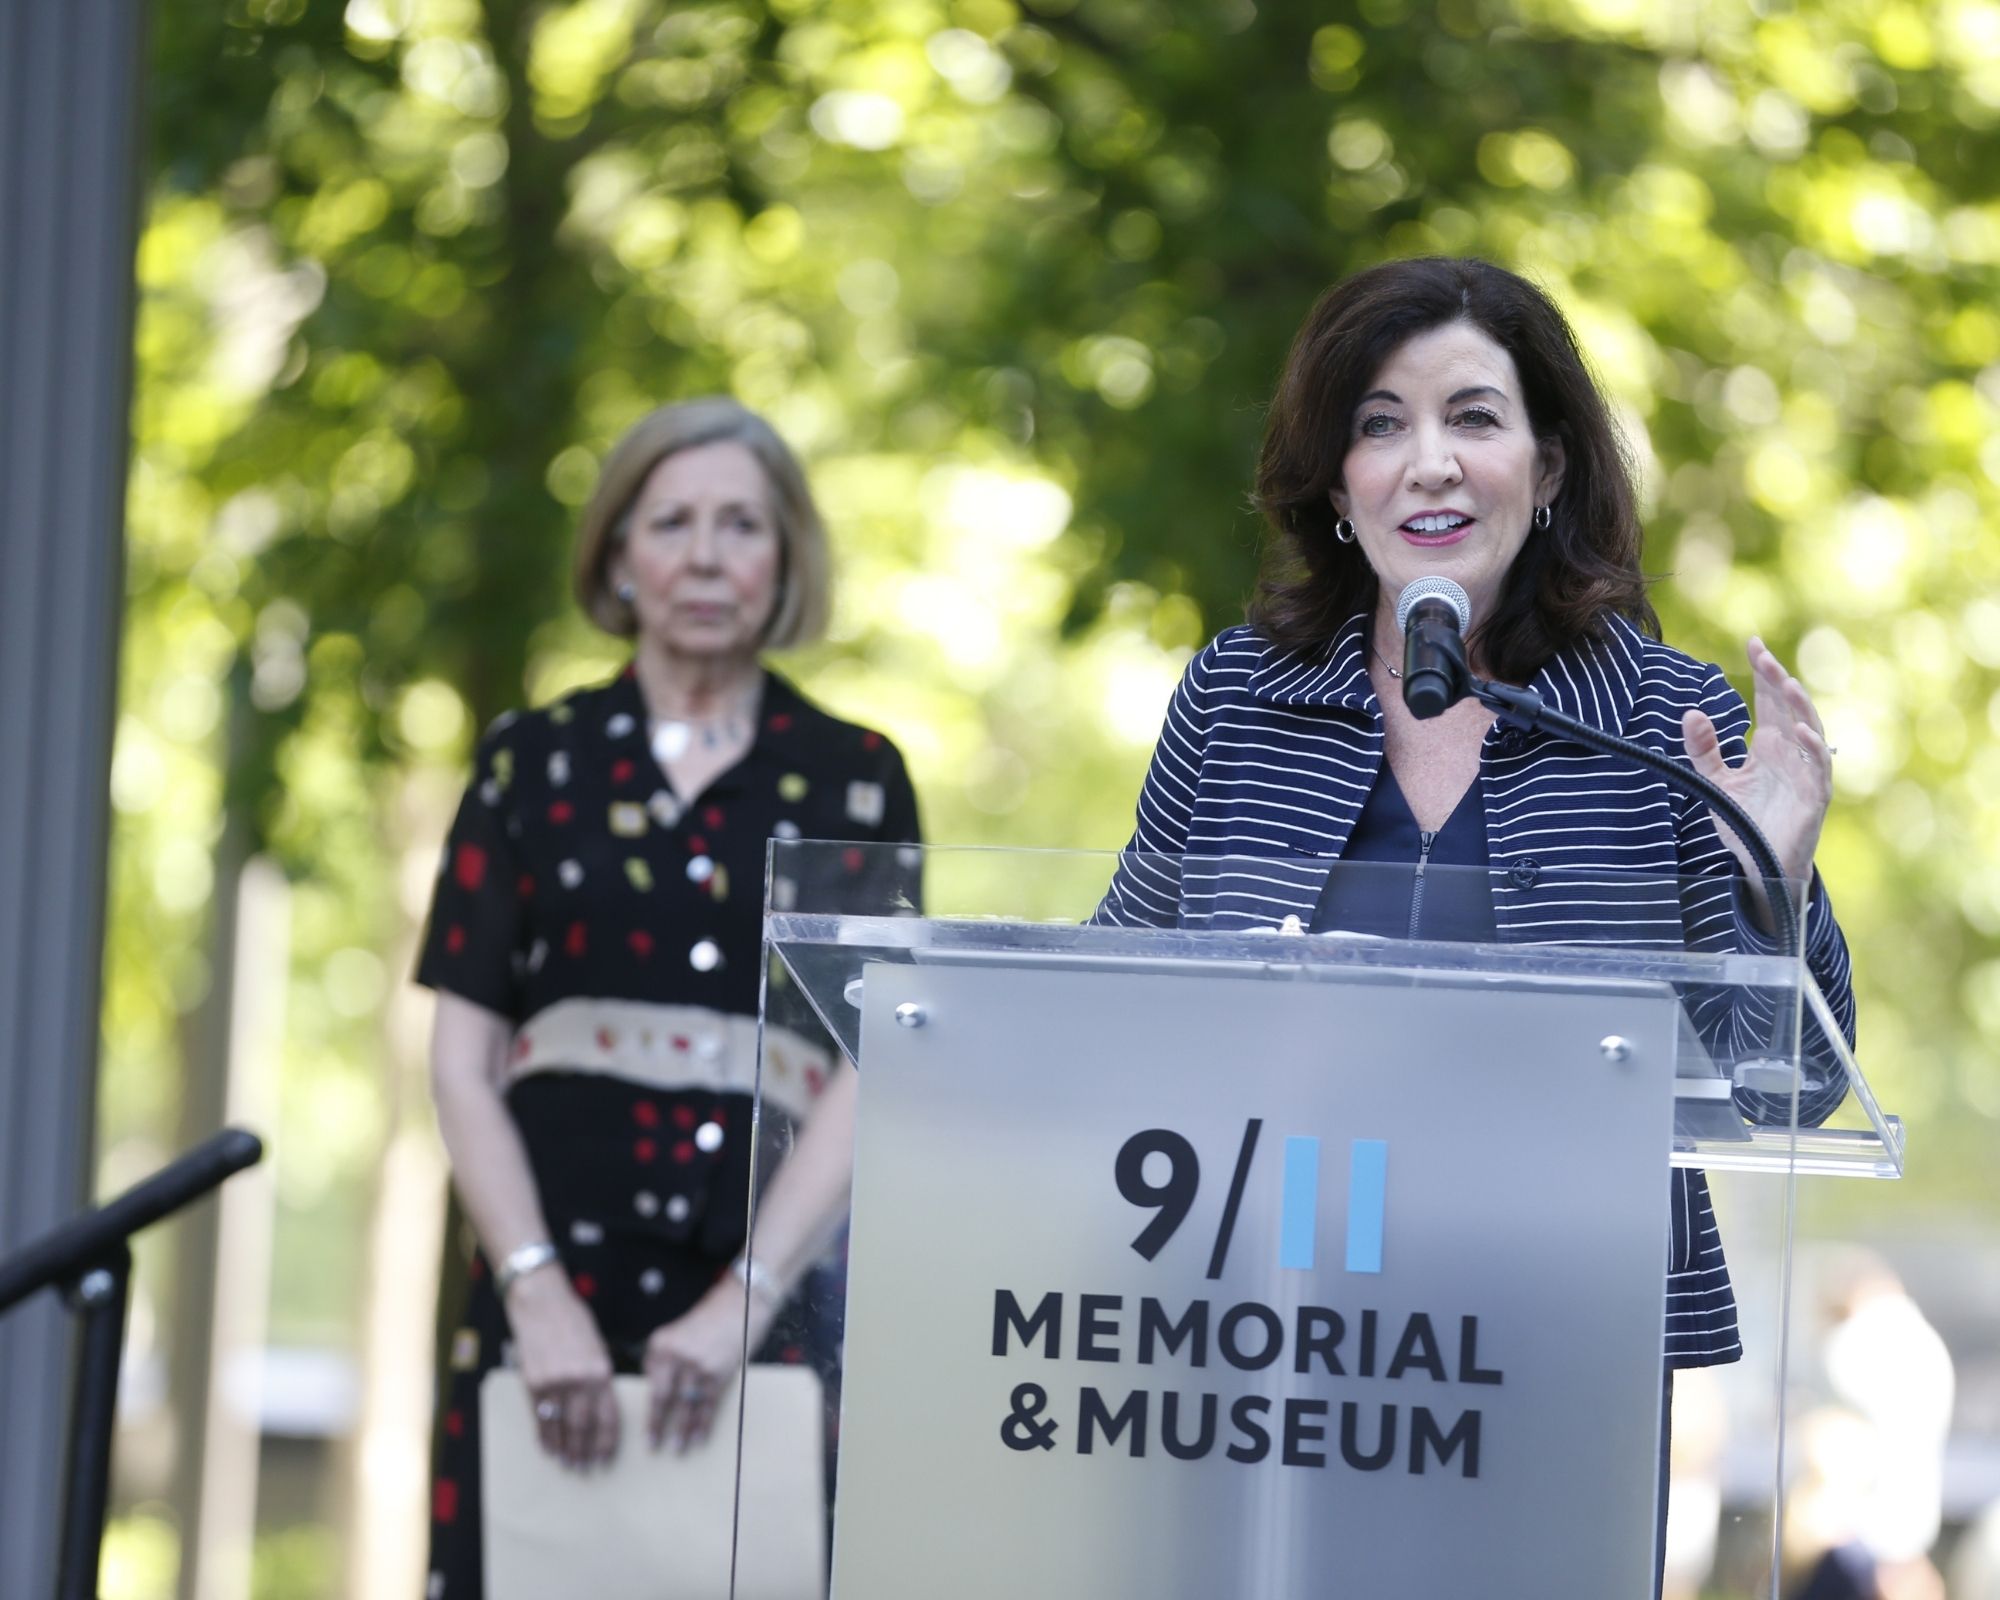 Alice Greenwald, our President & CEO, wears a dark dress and stand behind New York governor Kathy Hochul speaking at a podium